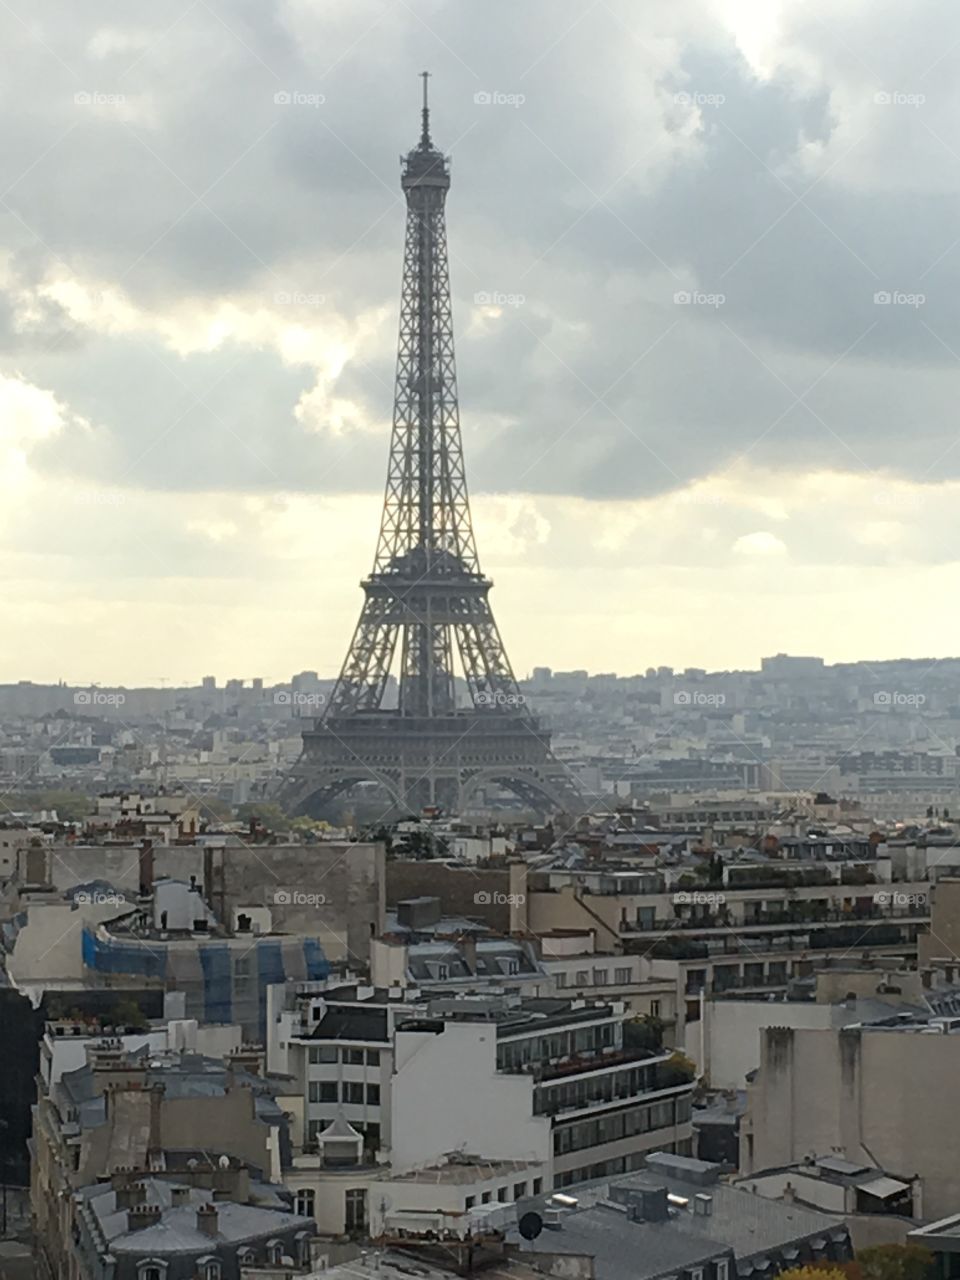 View of the Eiffel Tower from the top of the arc de triomphe, Paris 